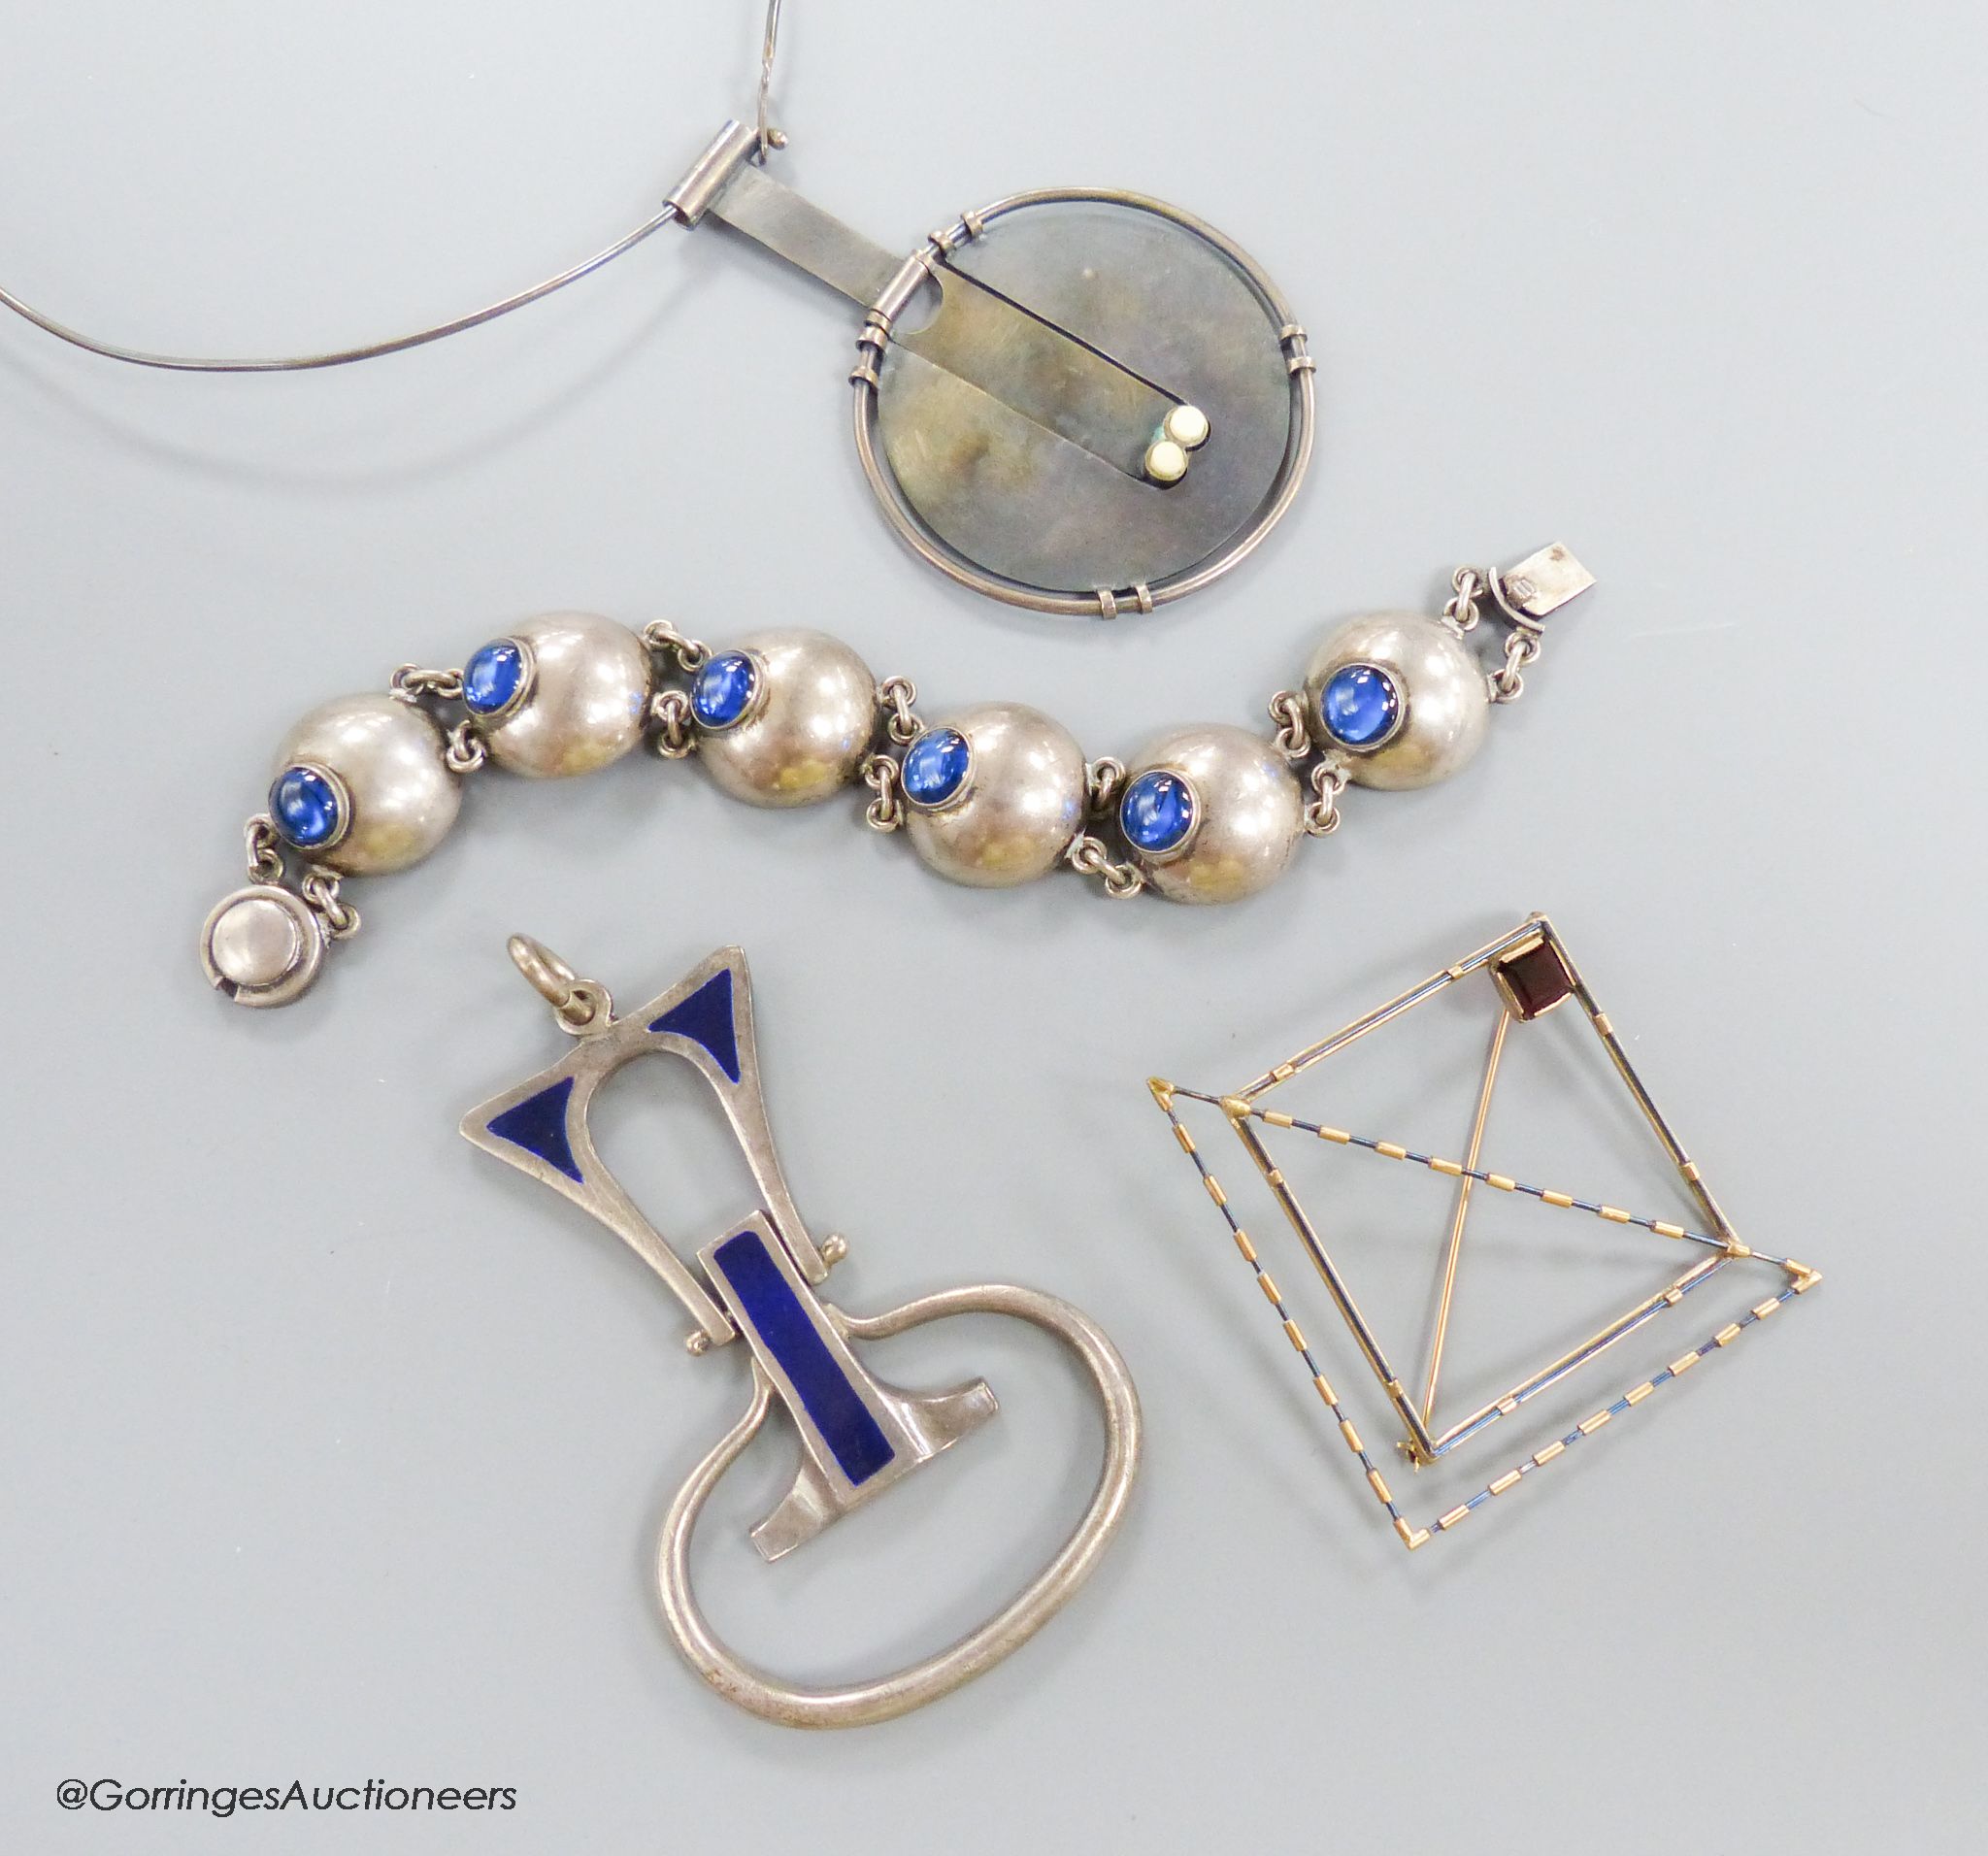 A stylish 1970's silver and blue enamel set pendant, maker E&N?, 78mm, gross 45.2 grams, a Scandinavian? 925 pendant necklace, a modernist square brooch and a blue paste and white metal bracelet.